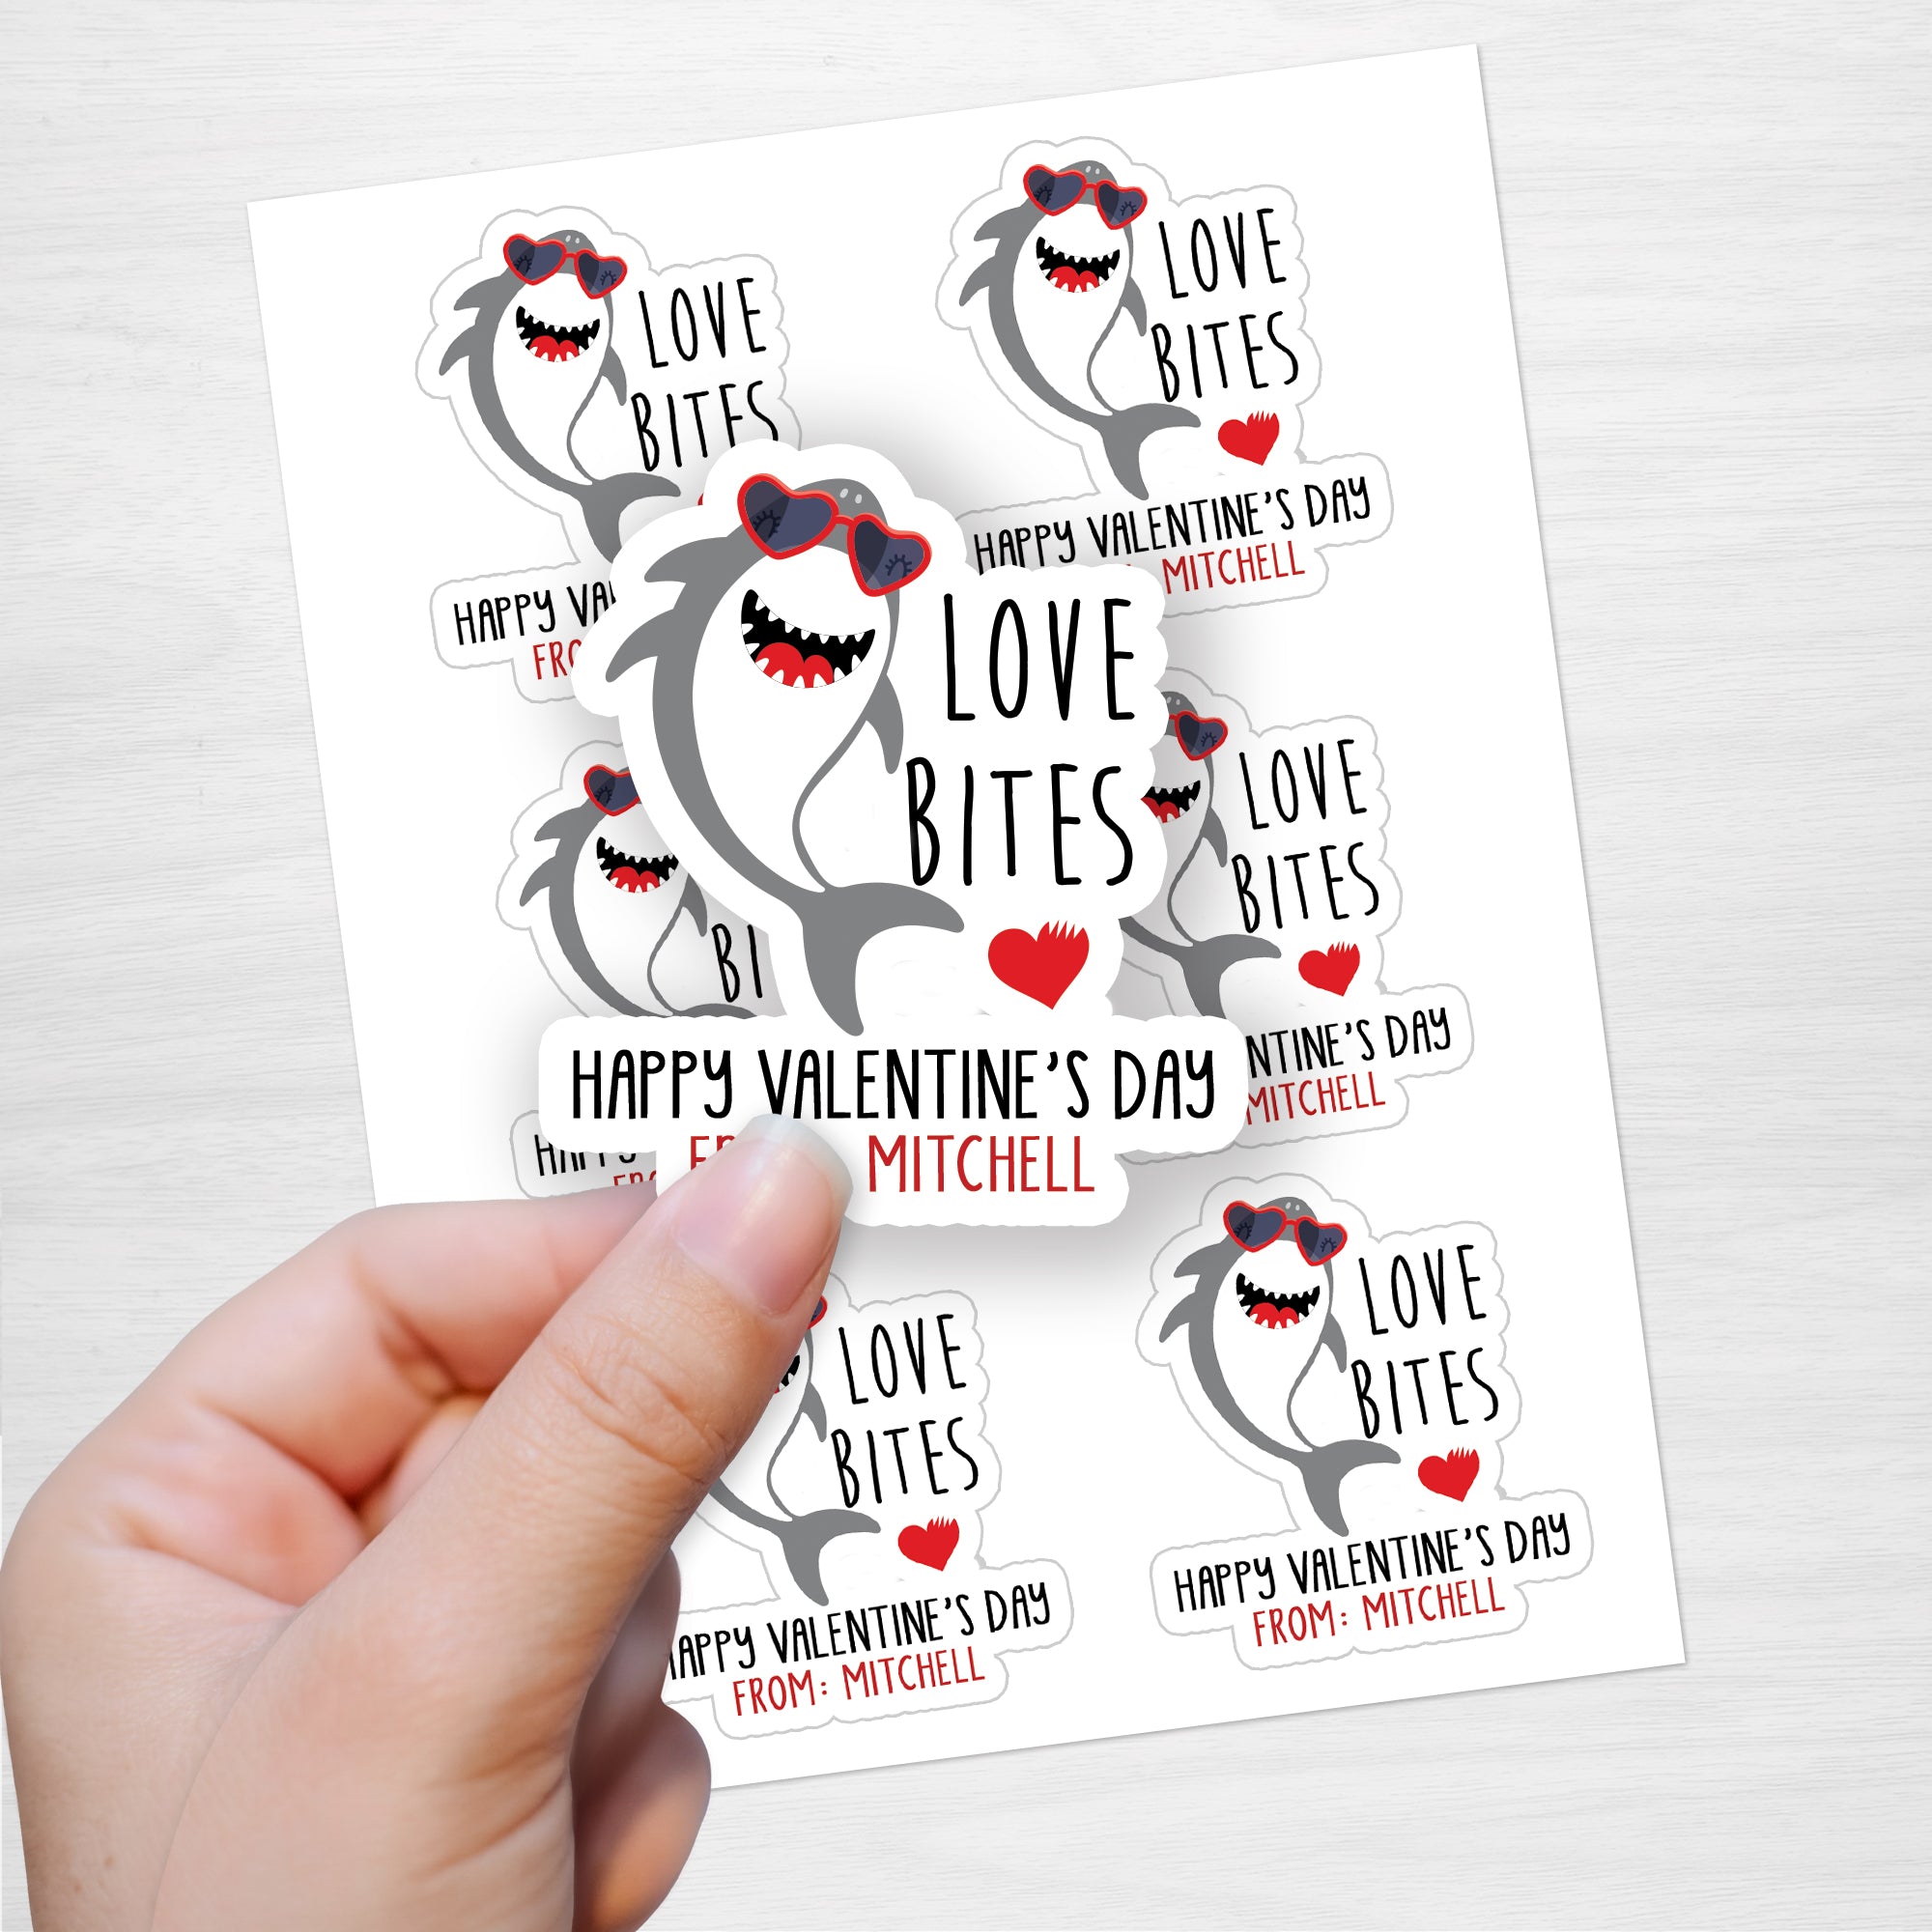 Die Cut Personalized Valentine's Day Stickers with a Shark and "Love Bites"